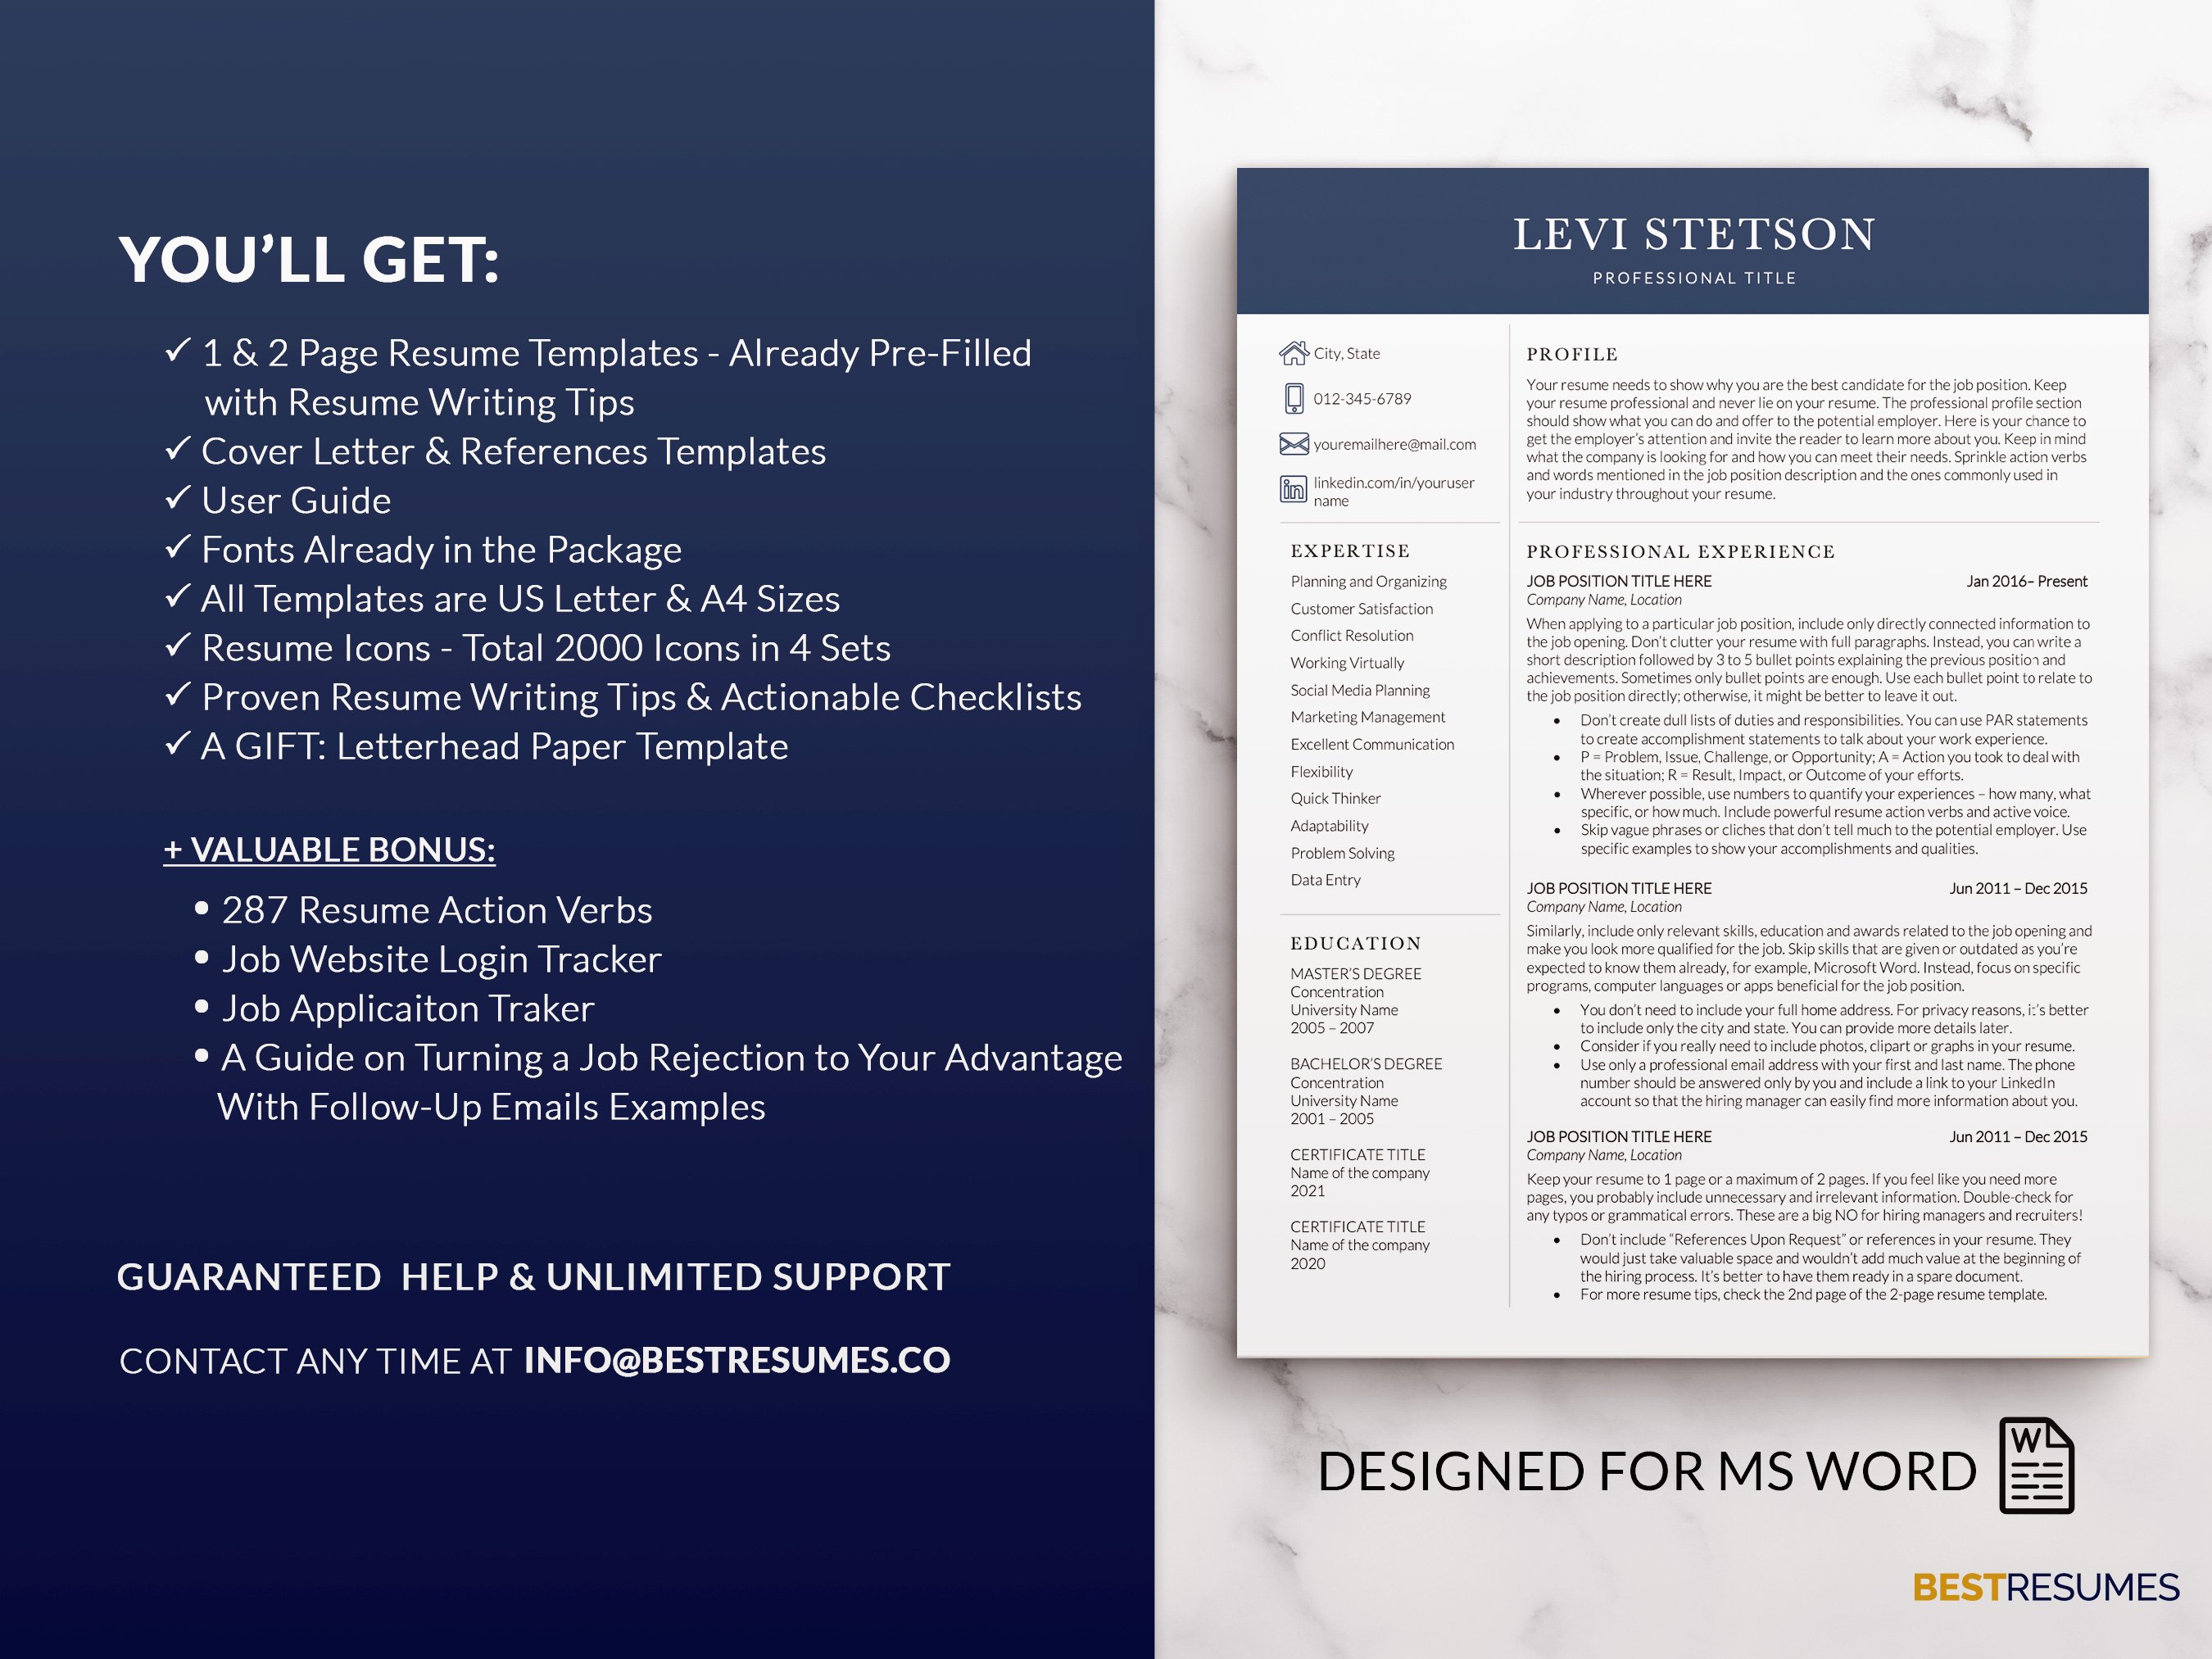 resume template word compact resume package levi stetson 927